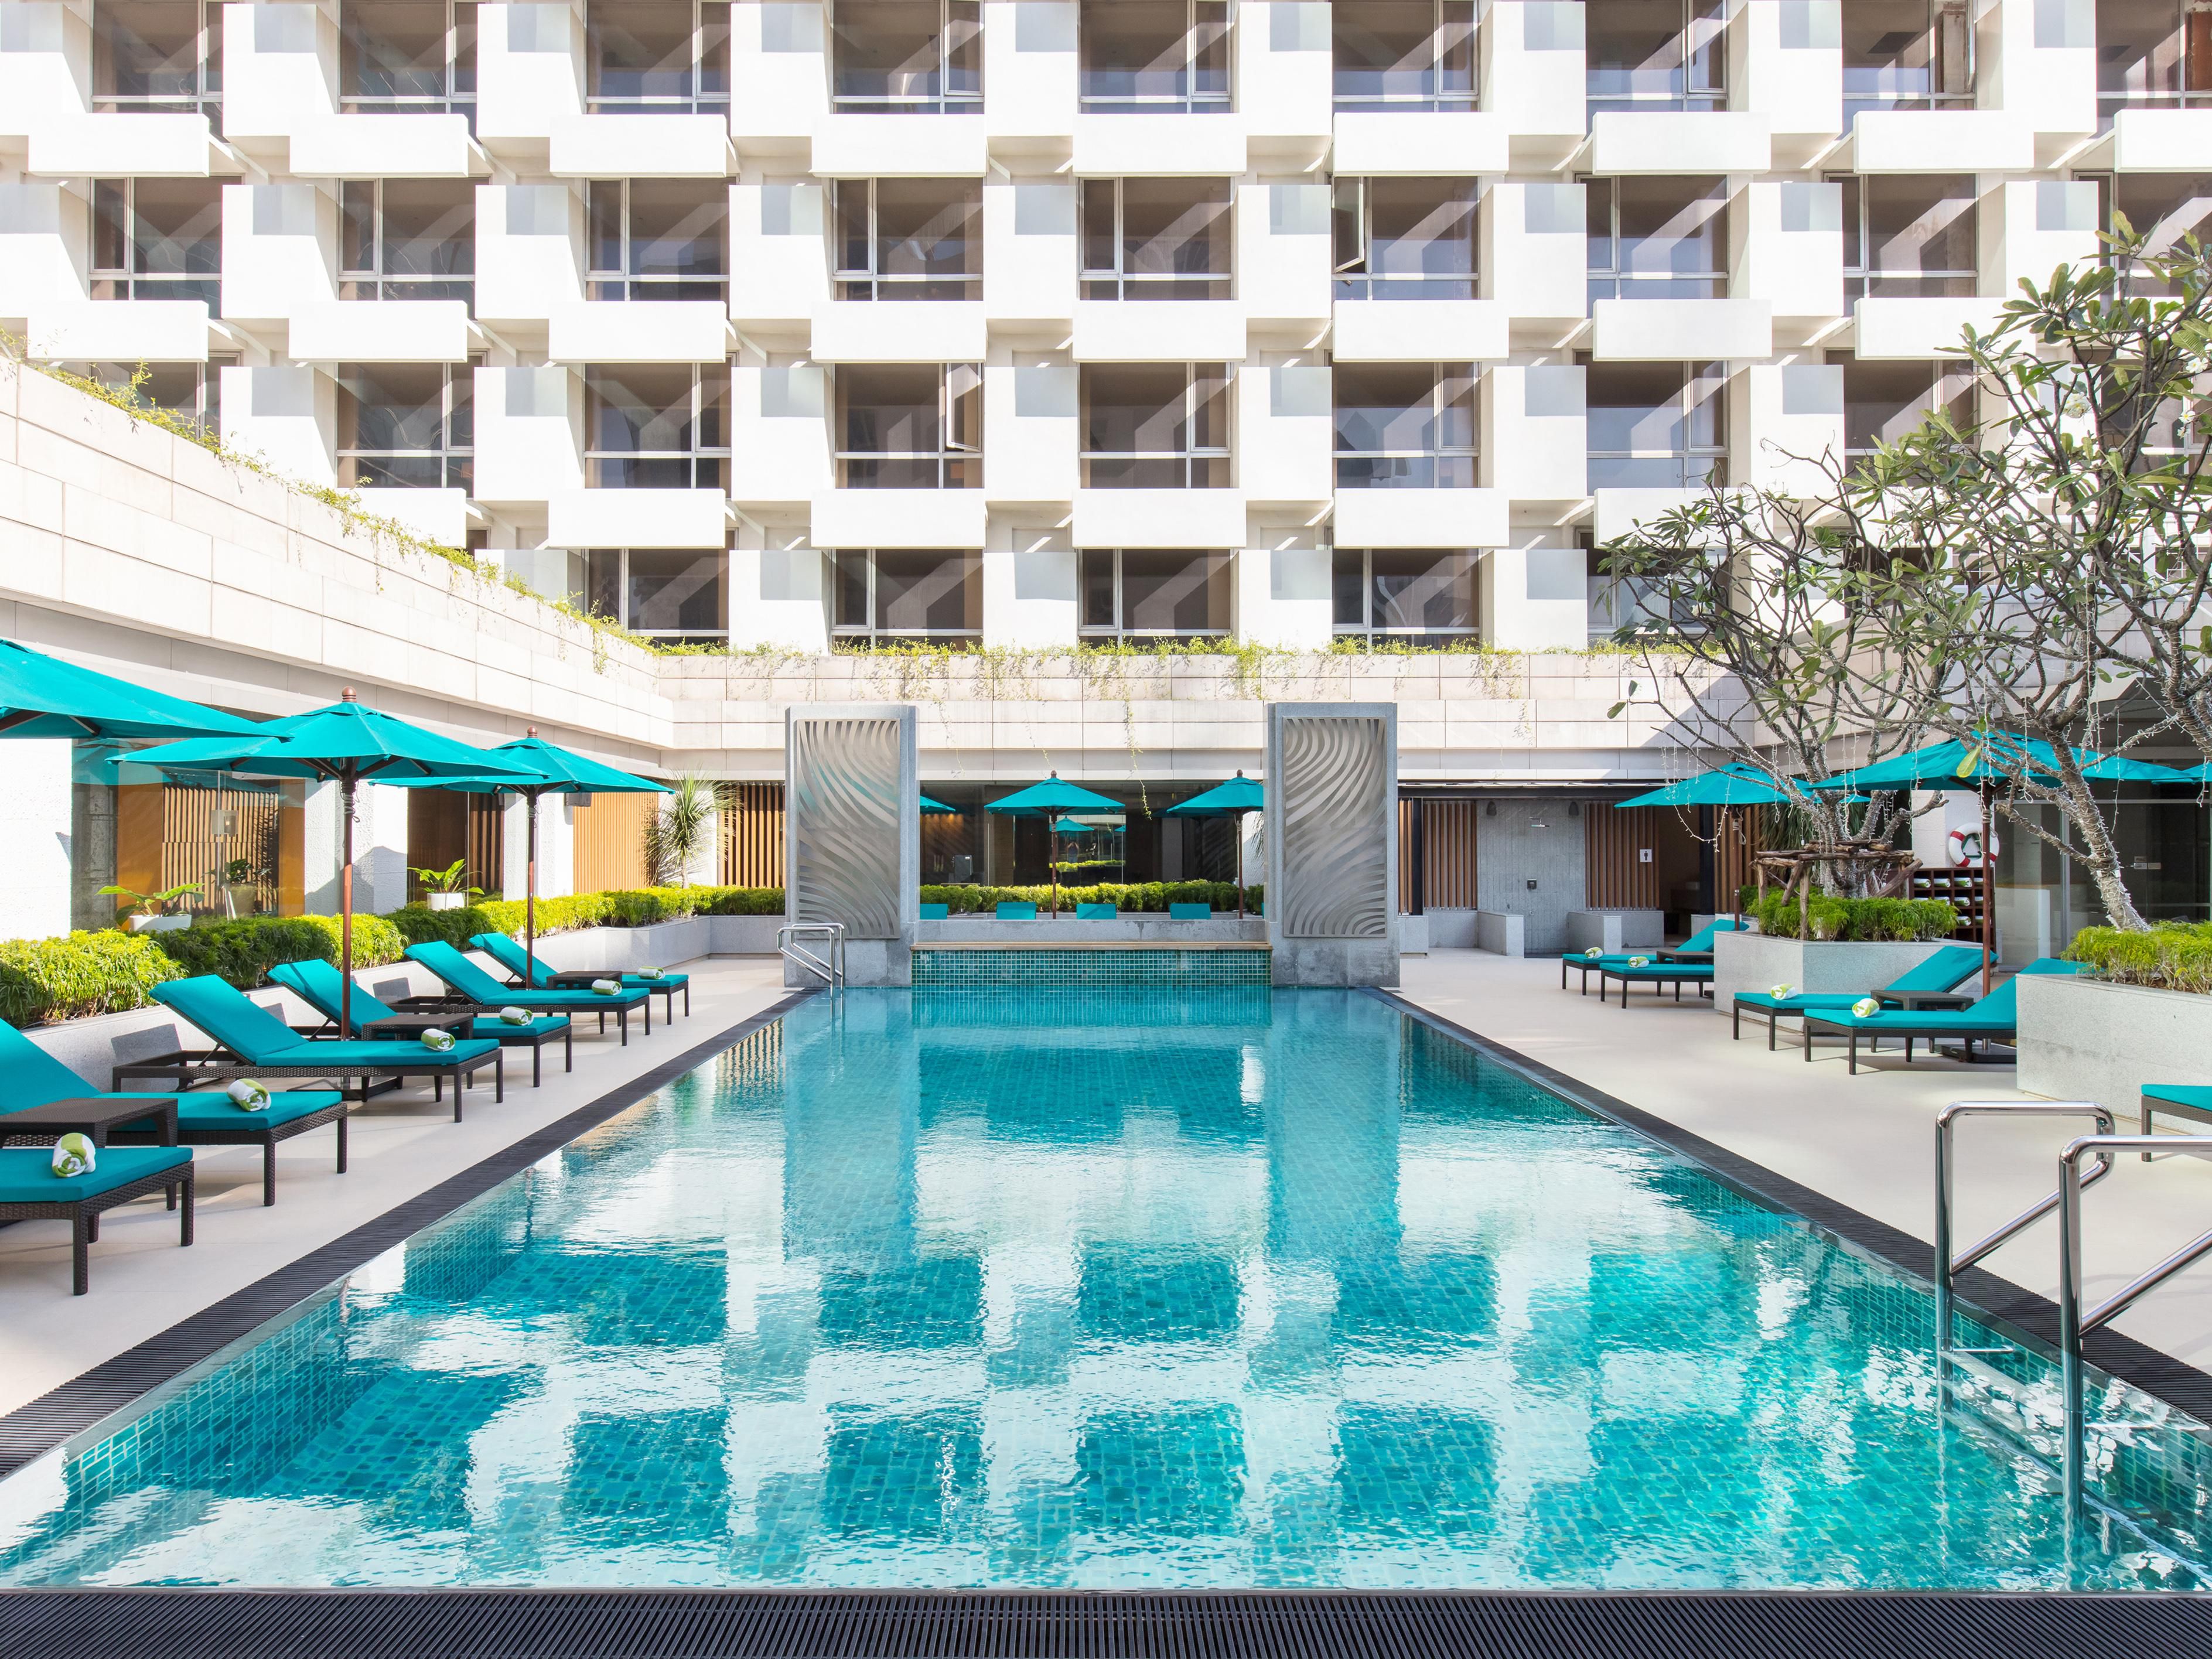 Infusing a sense of relaxation and embracing traditional Thai hospitality, our hotel creates a poolside oasis that feels worlds away from the bustling city. Our 12.5-metre pool is designed for your relaxation and enjoyment. Swim laps, make a splash, or lounge beneath an umbrella with a refreshing drink. 